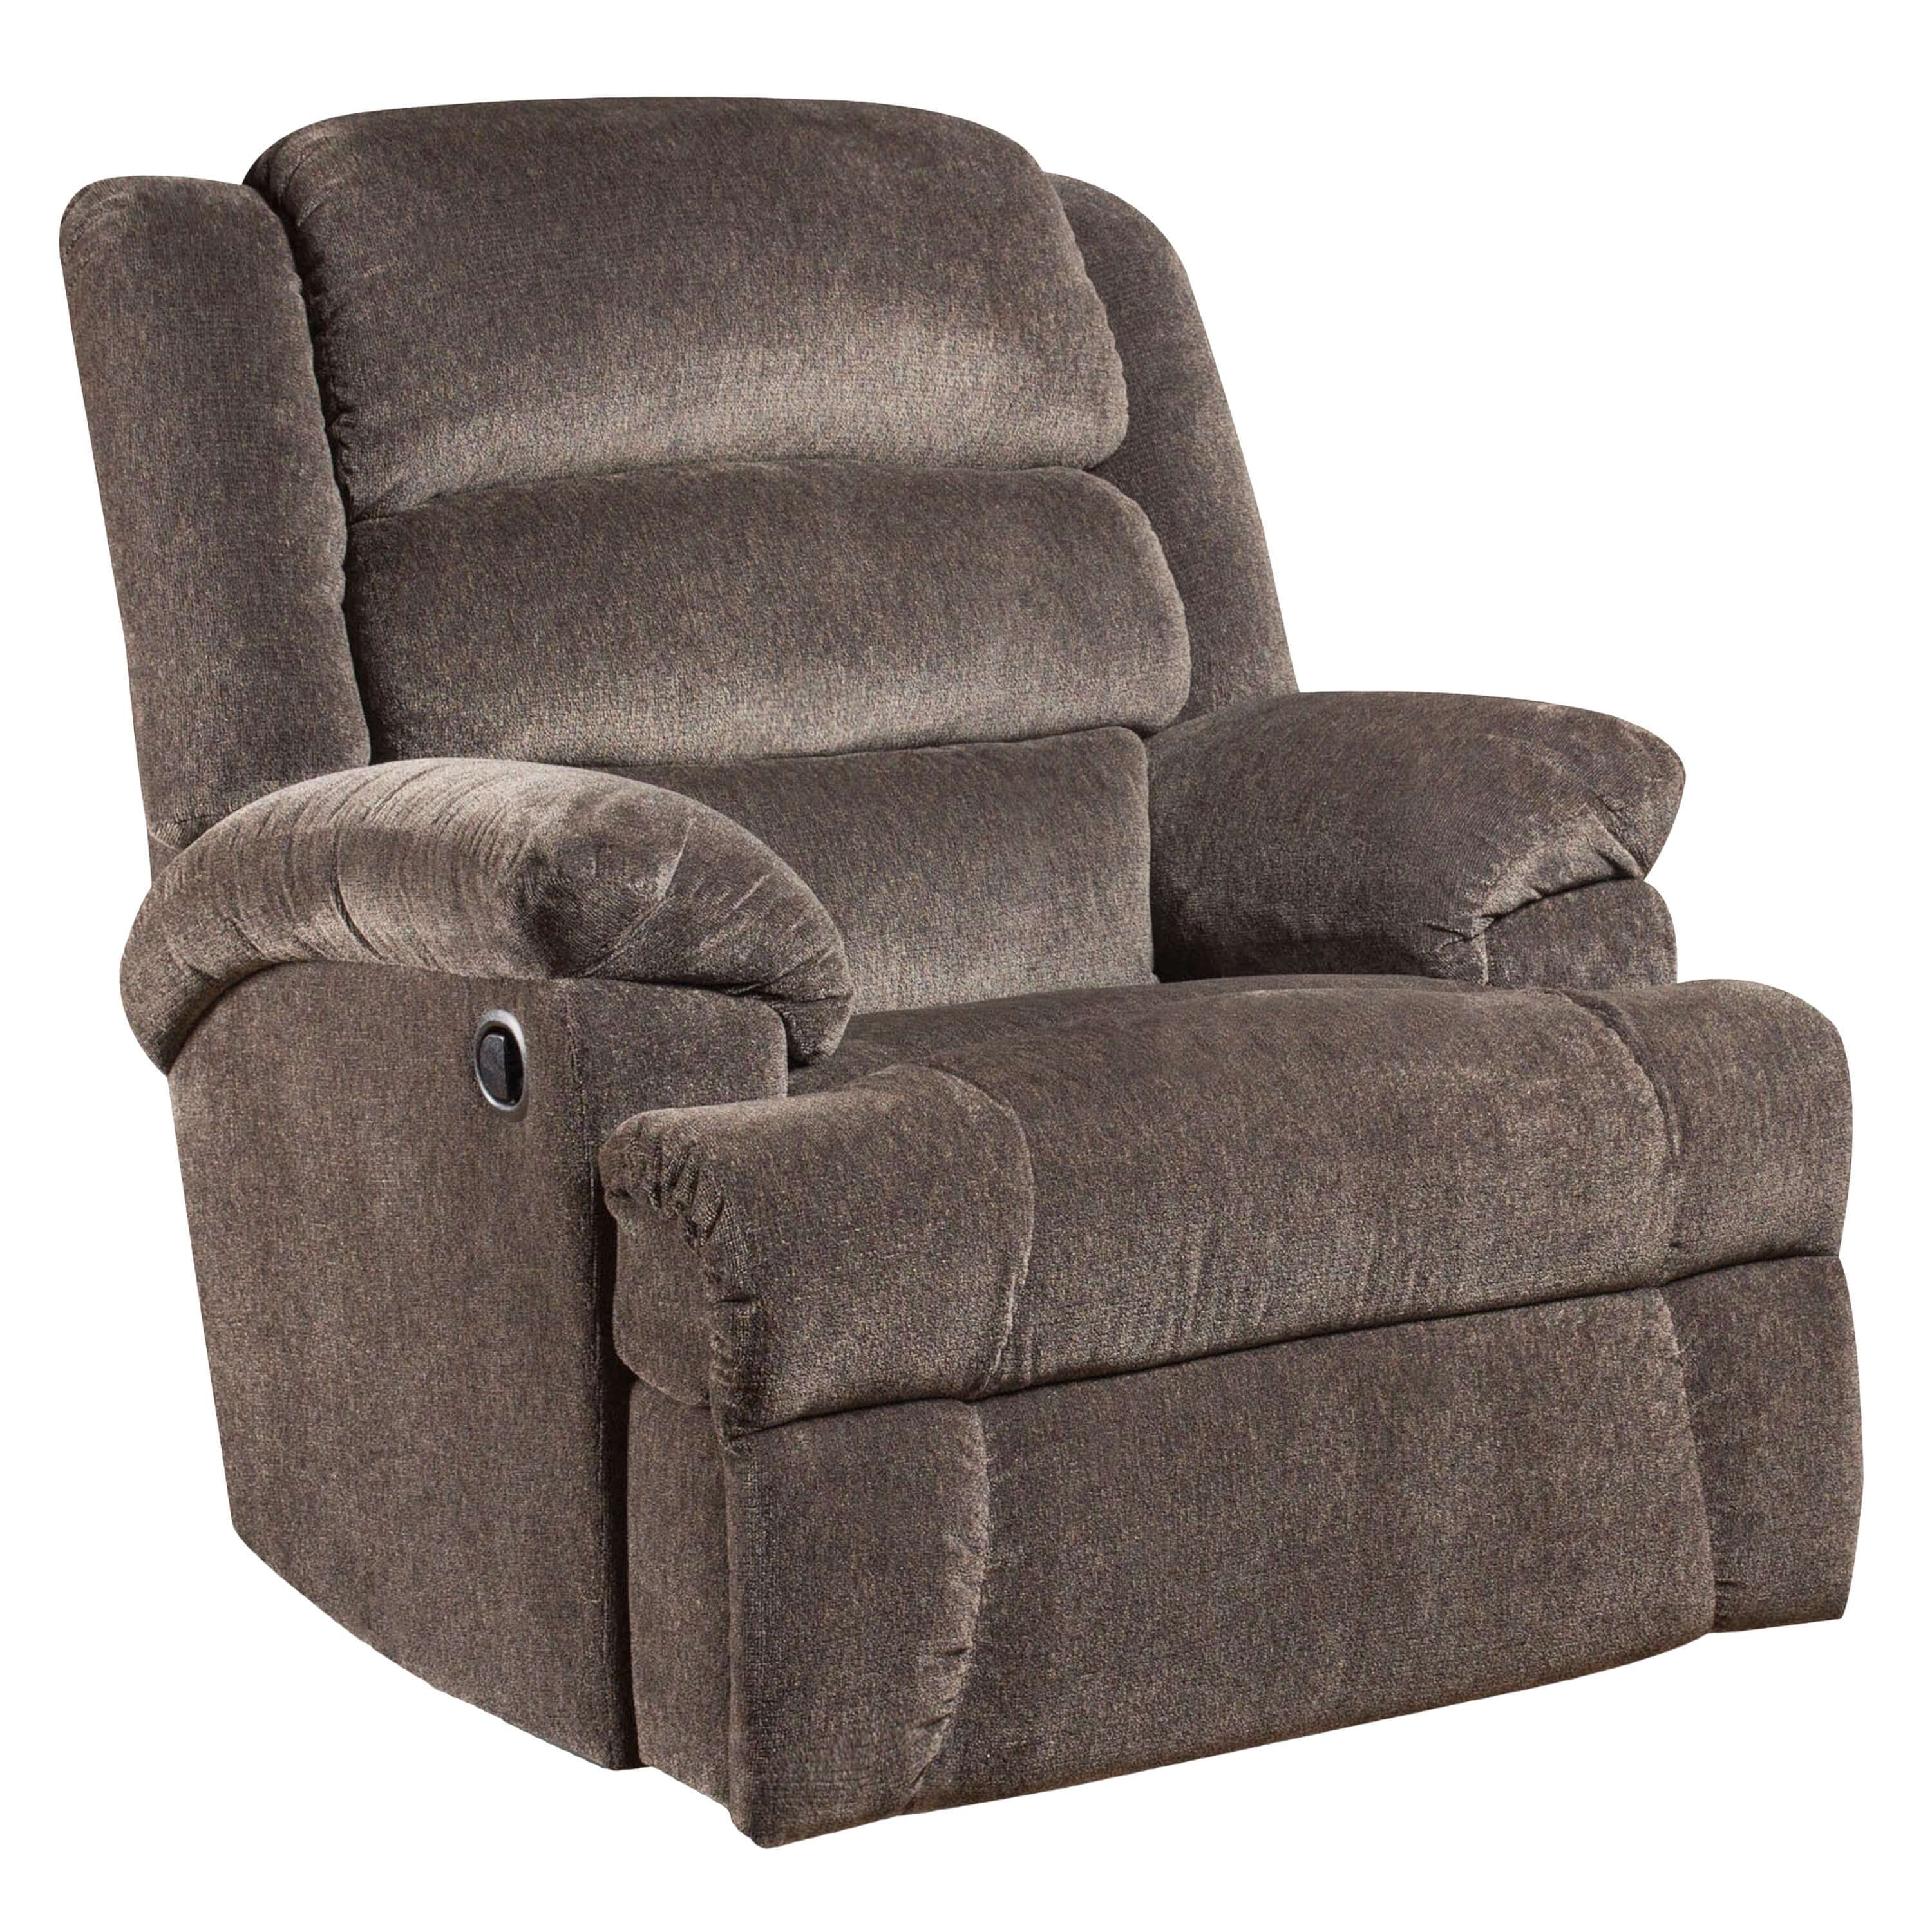 contemporary-recliners-comfortable-recliners.jpg